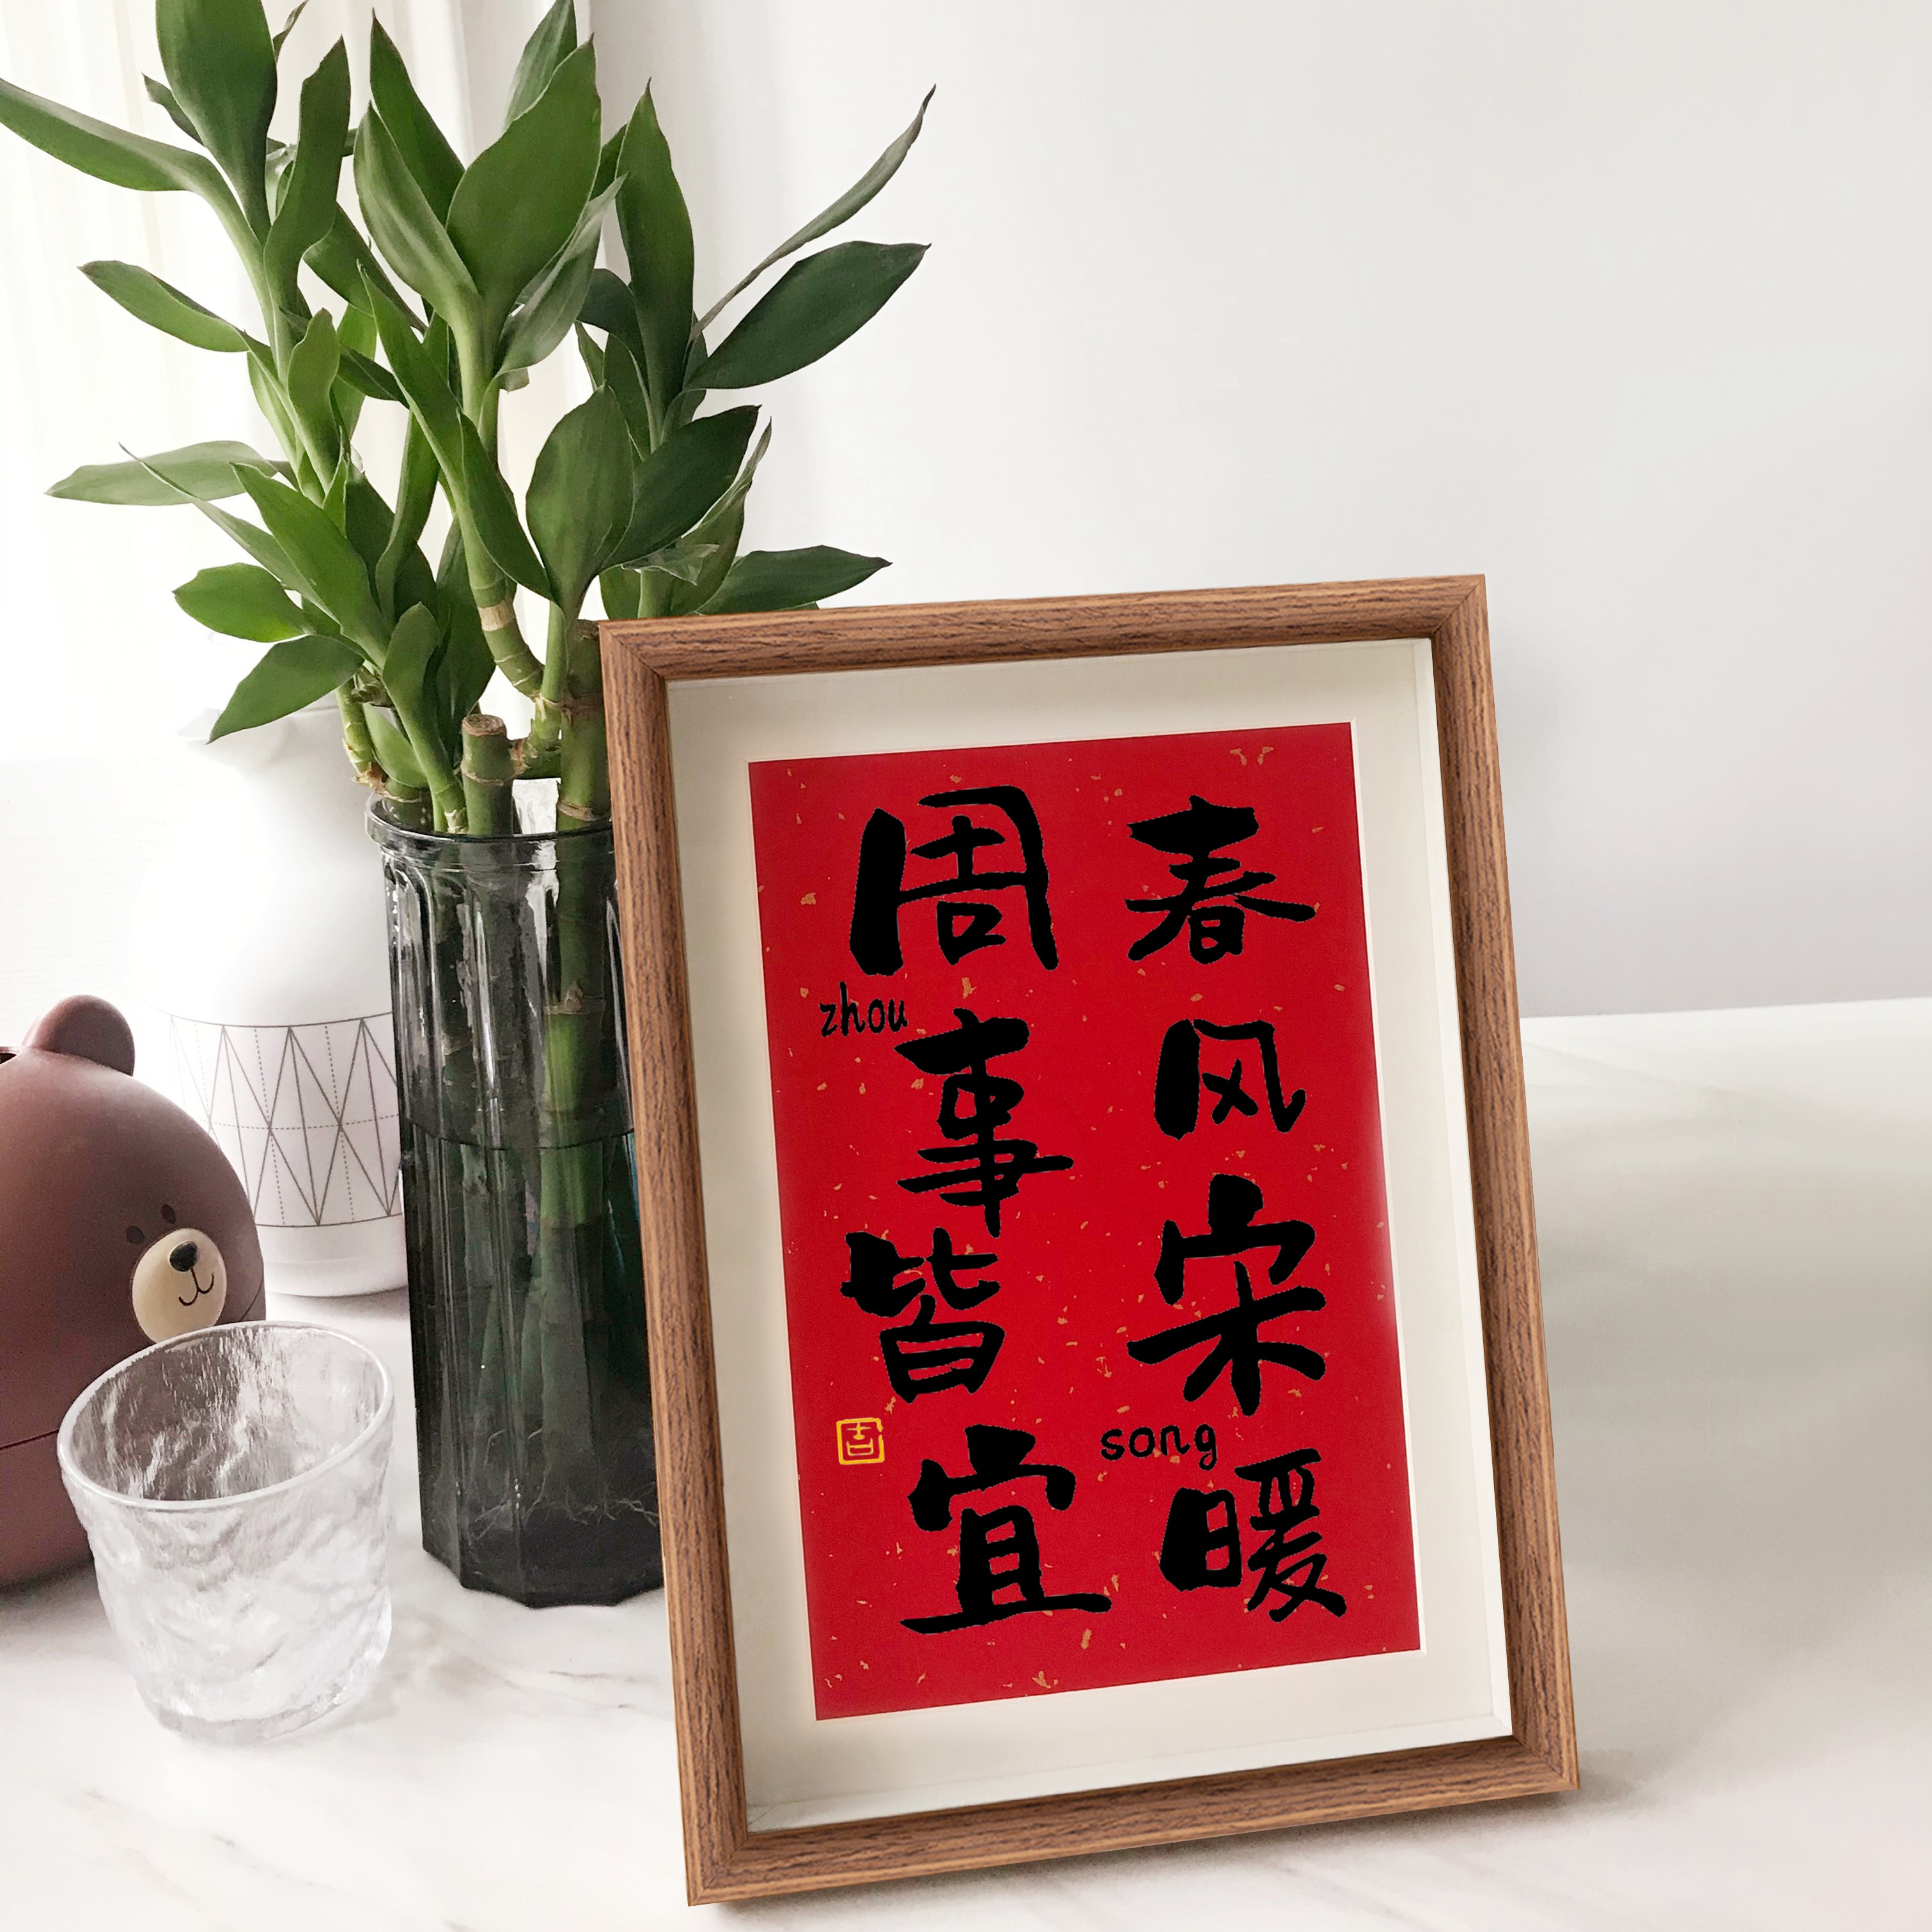 Lovers Surname Homonym Stem Personality Calligraphy Photo Frame Hem Sprinkle Gold Red Bottom Friend Collar Certificate Booking Wedding Gift Tailor-Taobao